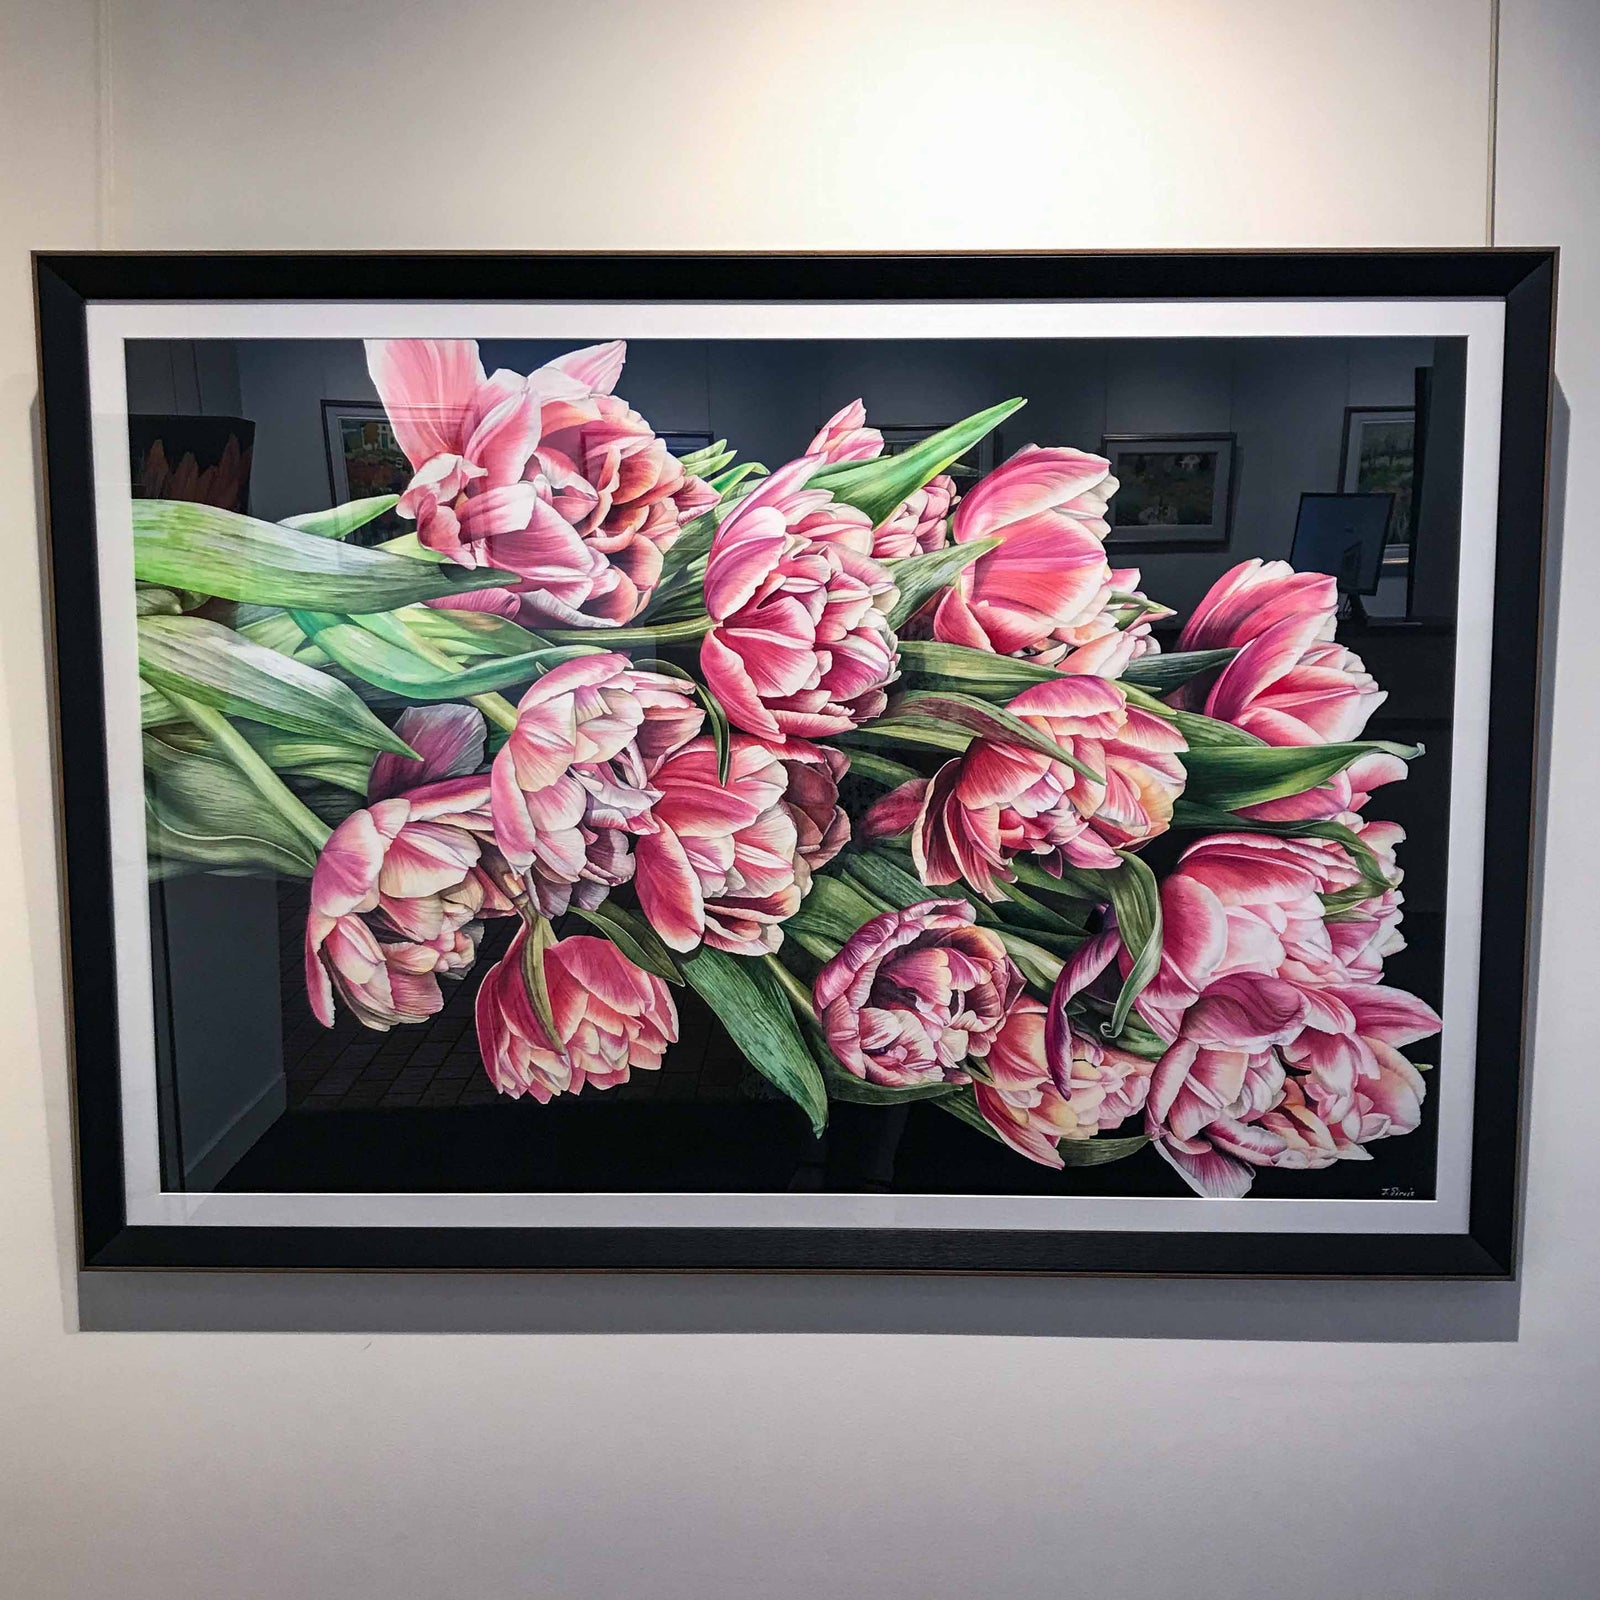 Jeannette Sirois A Gathering of Tulips | 32" x 49" Coloured Pencil on Paper